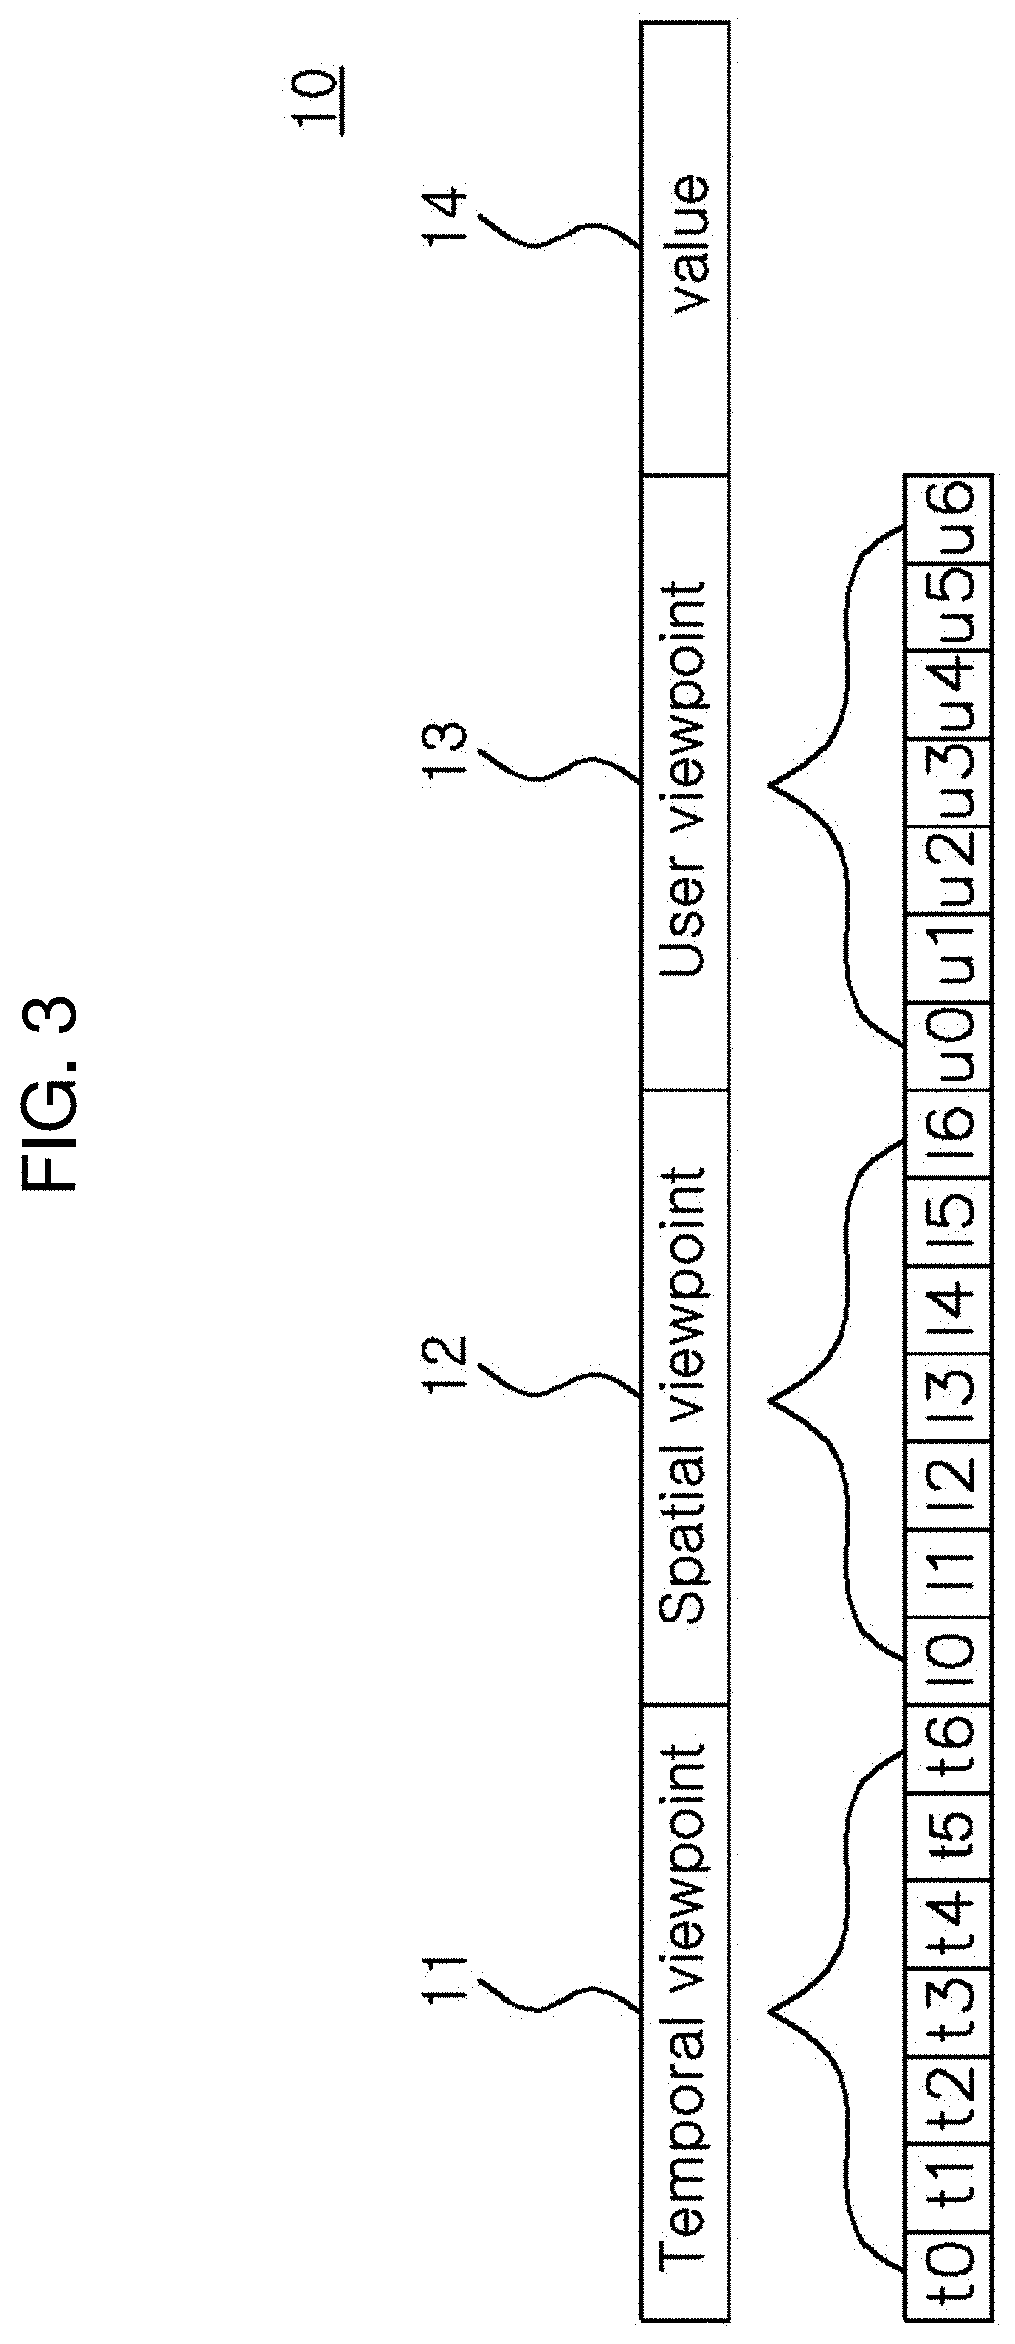 Numerical information management device using data structure